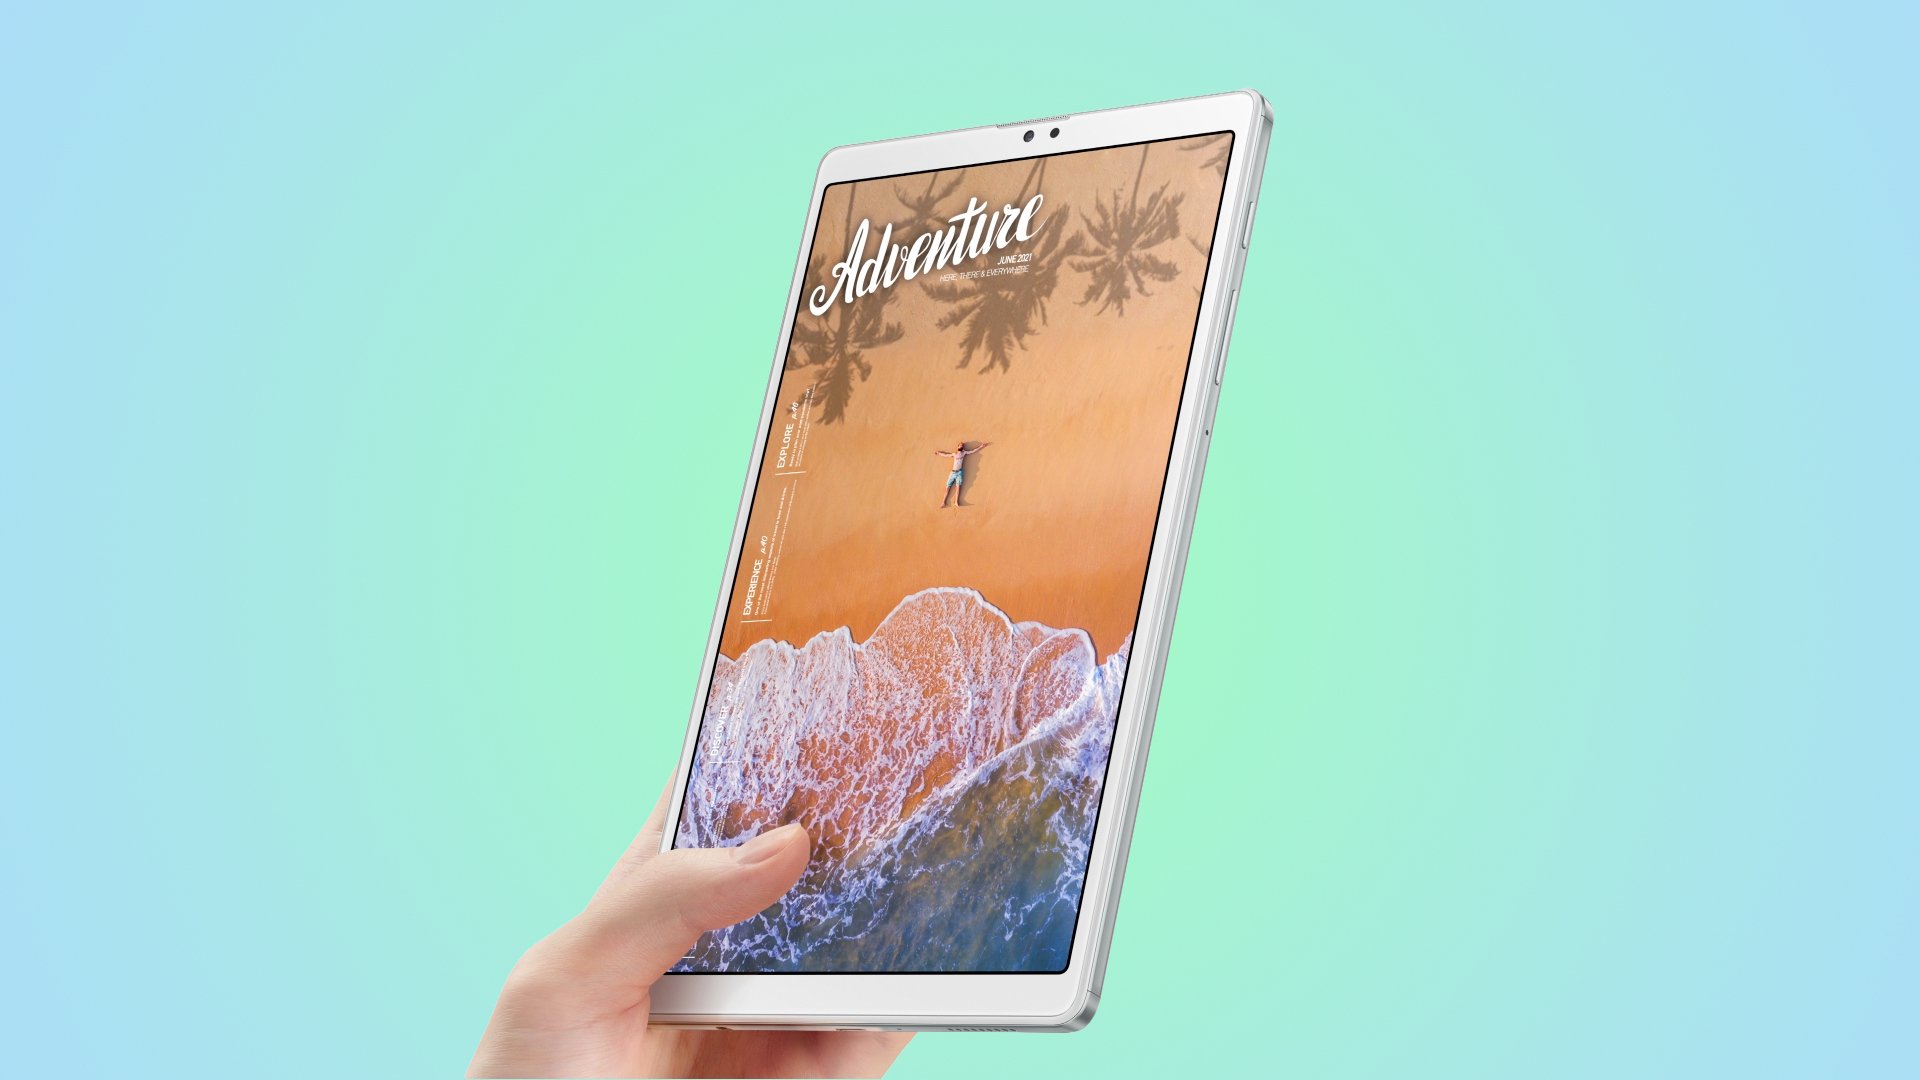 Samsung Galaxy Tab A7 Lite gains new features with One UI 5.1.1